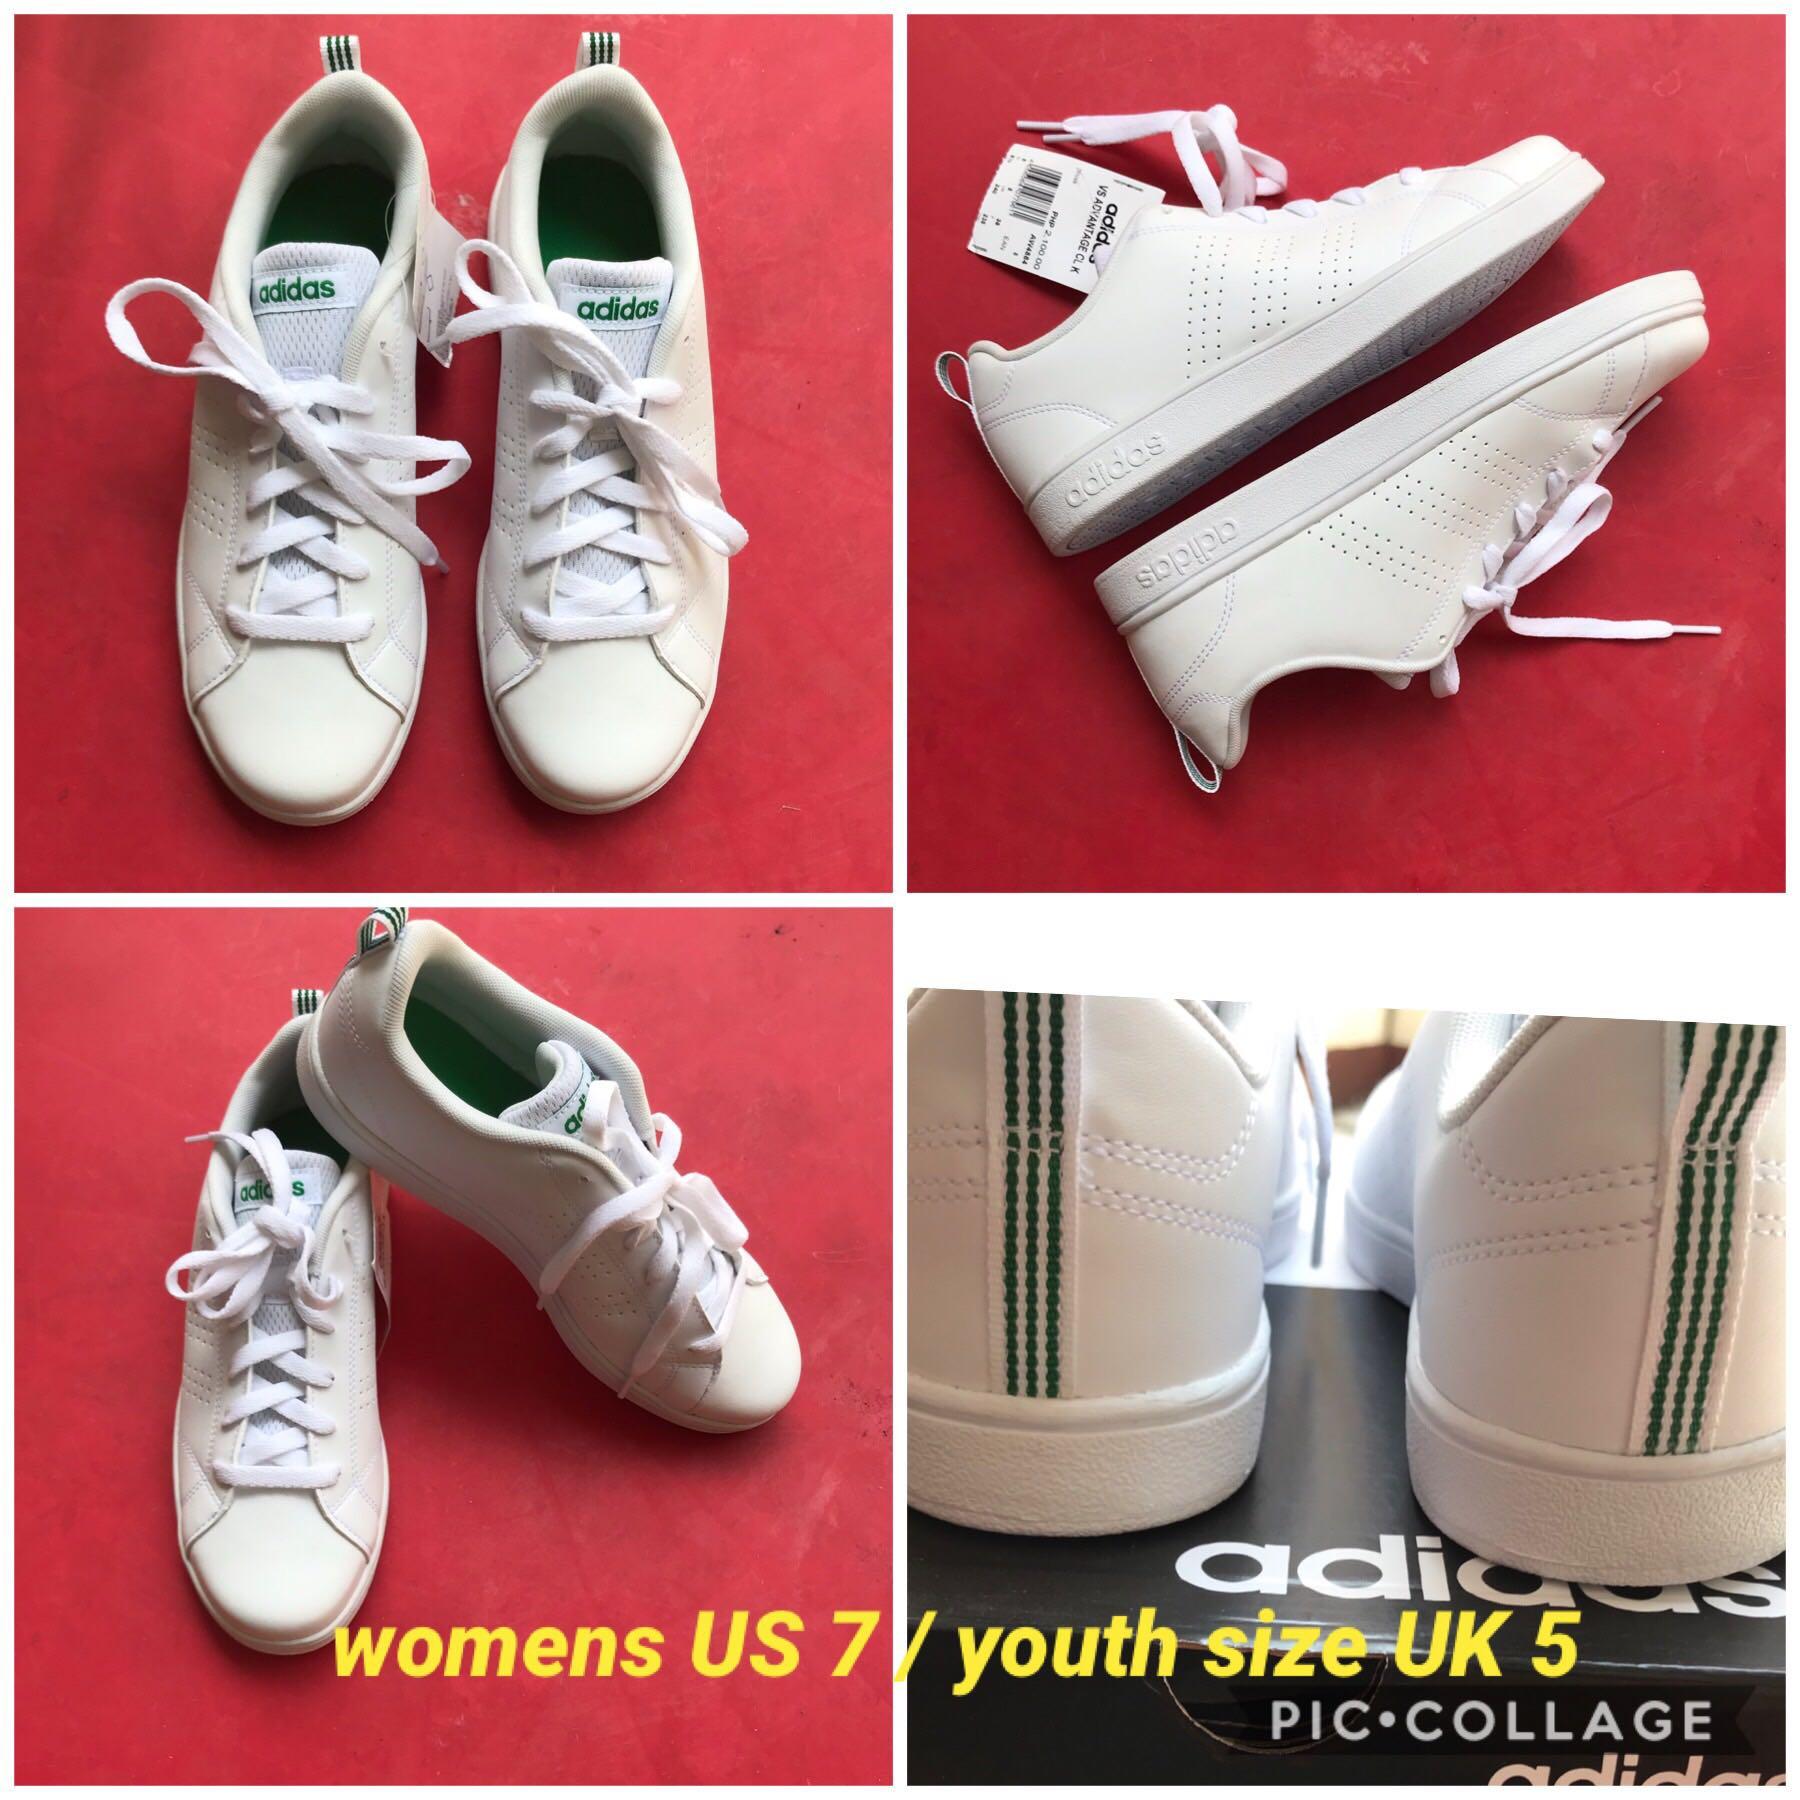 adidas youth size 7 in womens